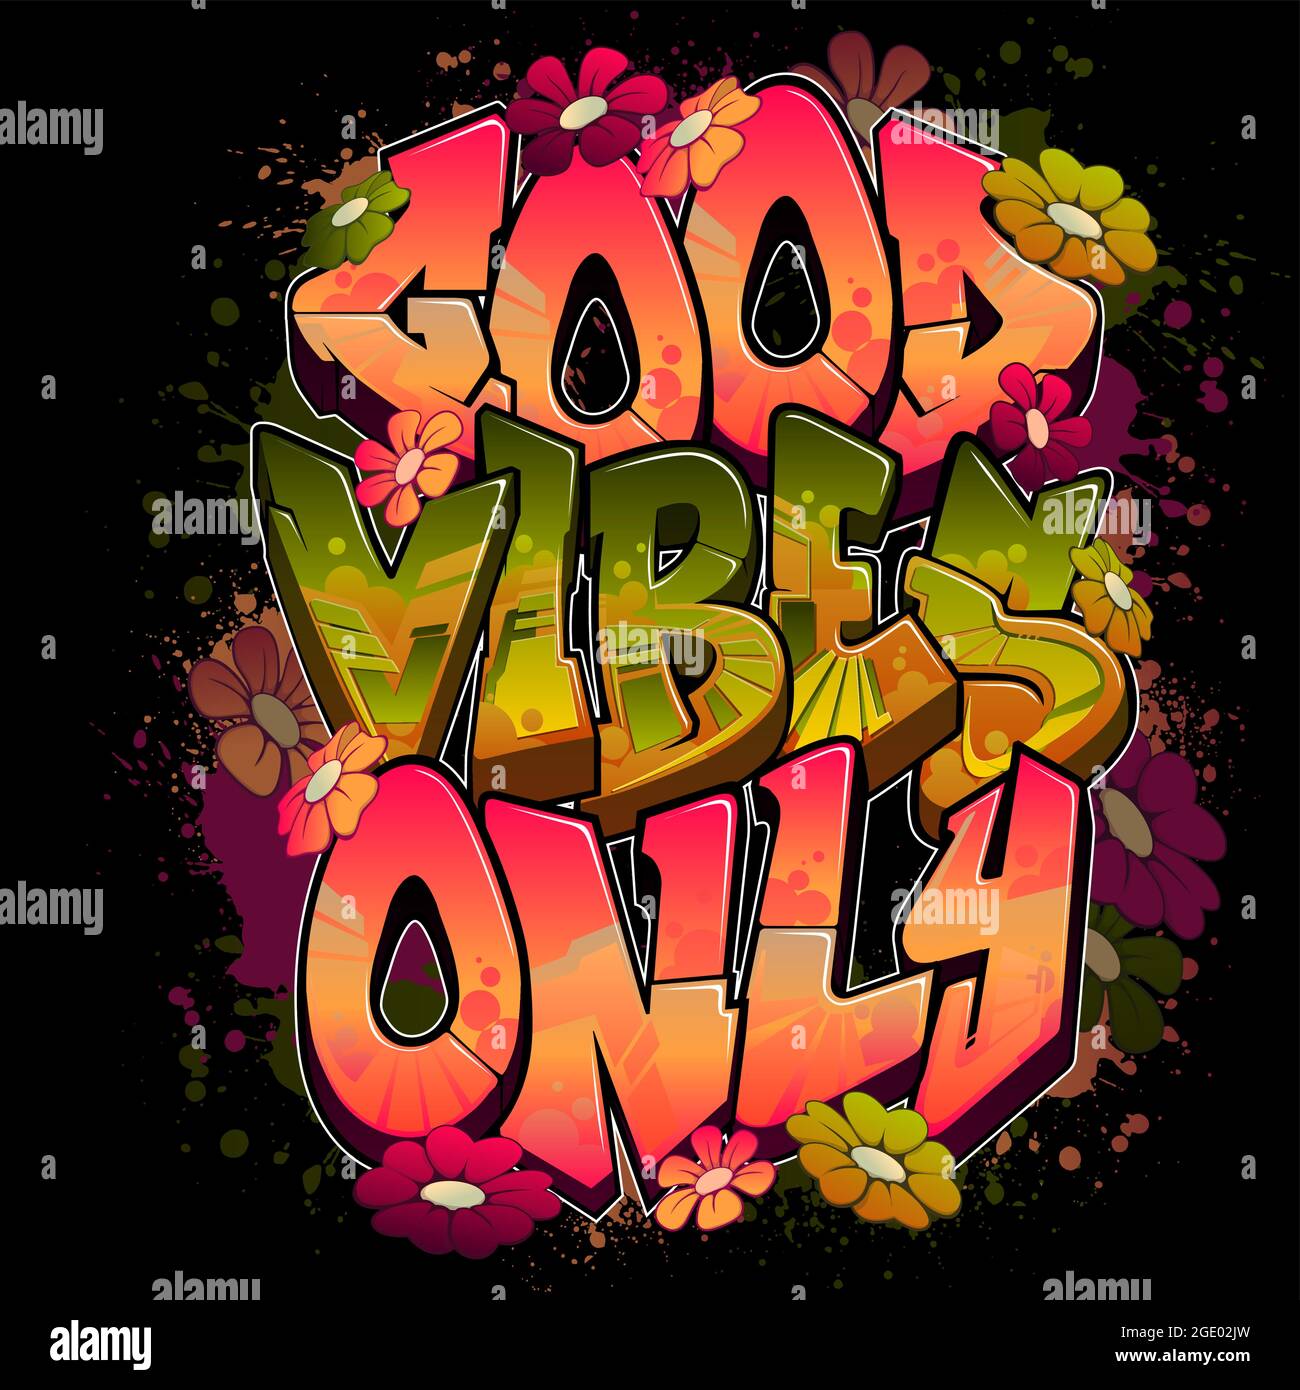 Handwriting text, Get your groove on. Graffiti style hand lettering  calligraphy. Design for print, textile, web, home decor, poster, card,  t-shirt, or any use. Stock Vector